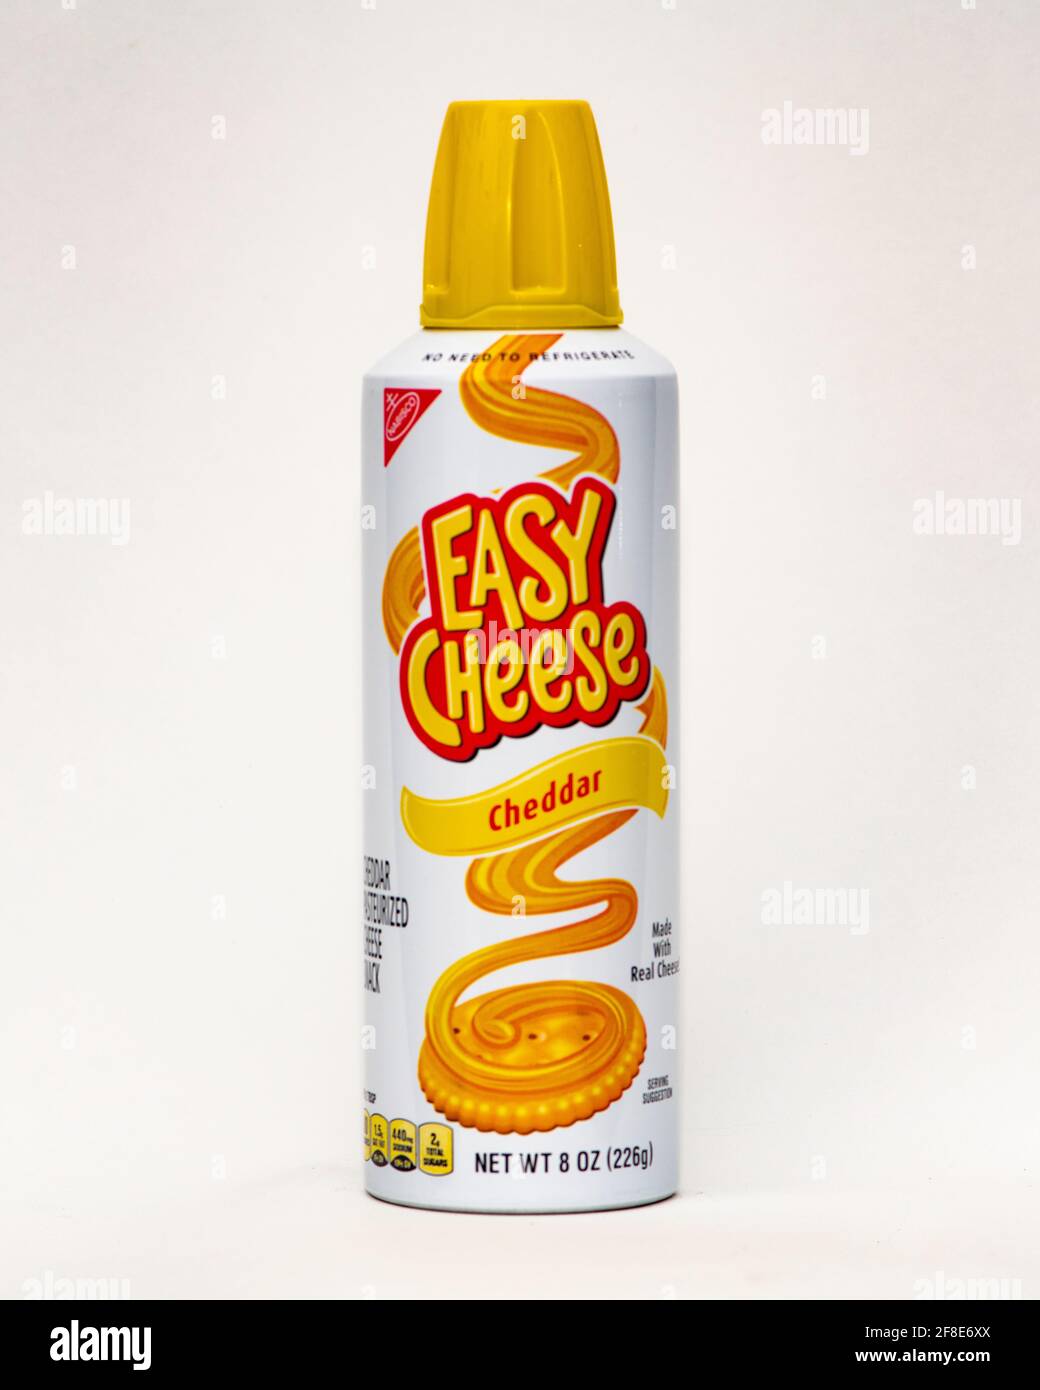 A pressurized can or Cheddar flavor Easy Cheese, just squirt it onto a cracker for an instant delicious snack. Stock Photo